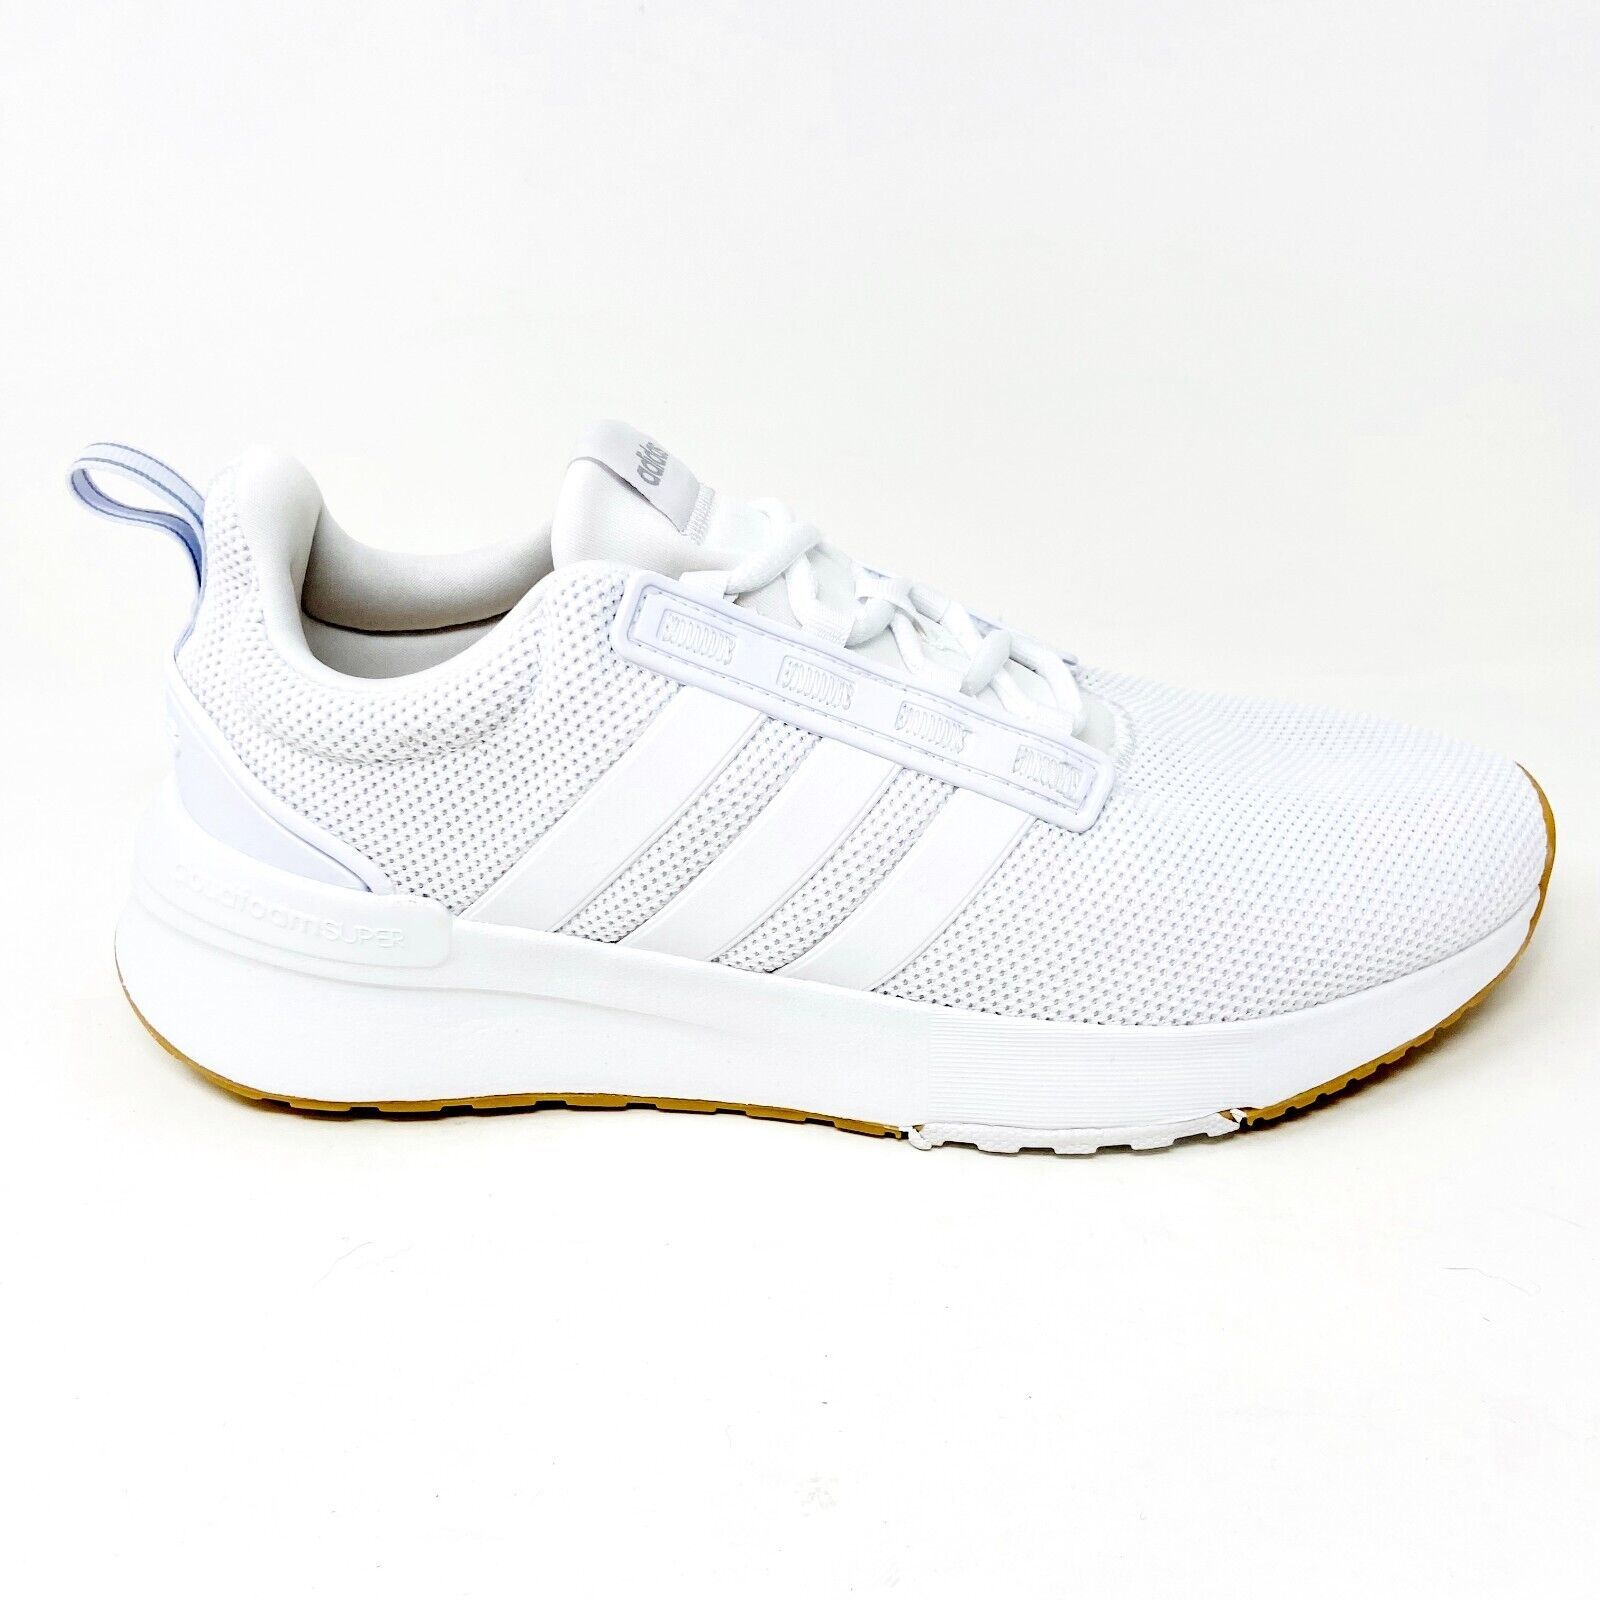 Adidas Racer TR21 White Womens Athletic Running Shoes GX4207